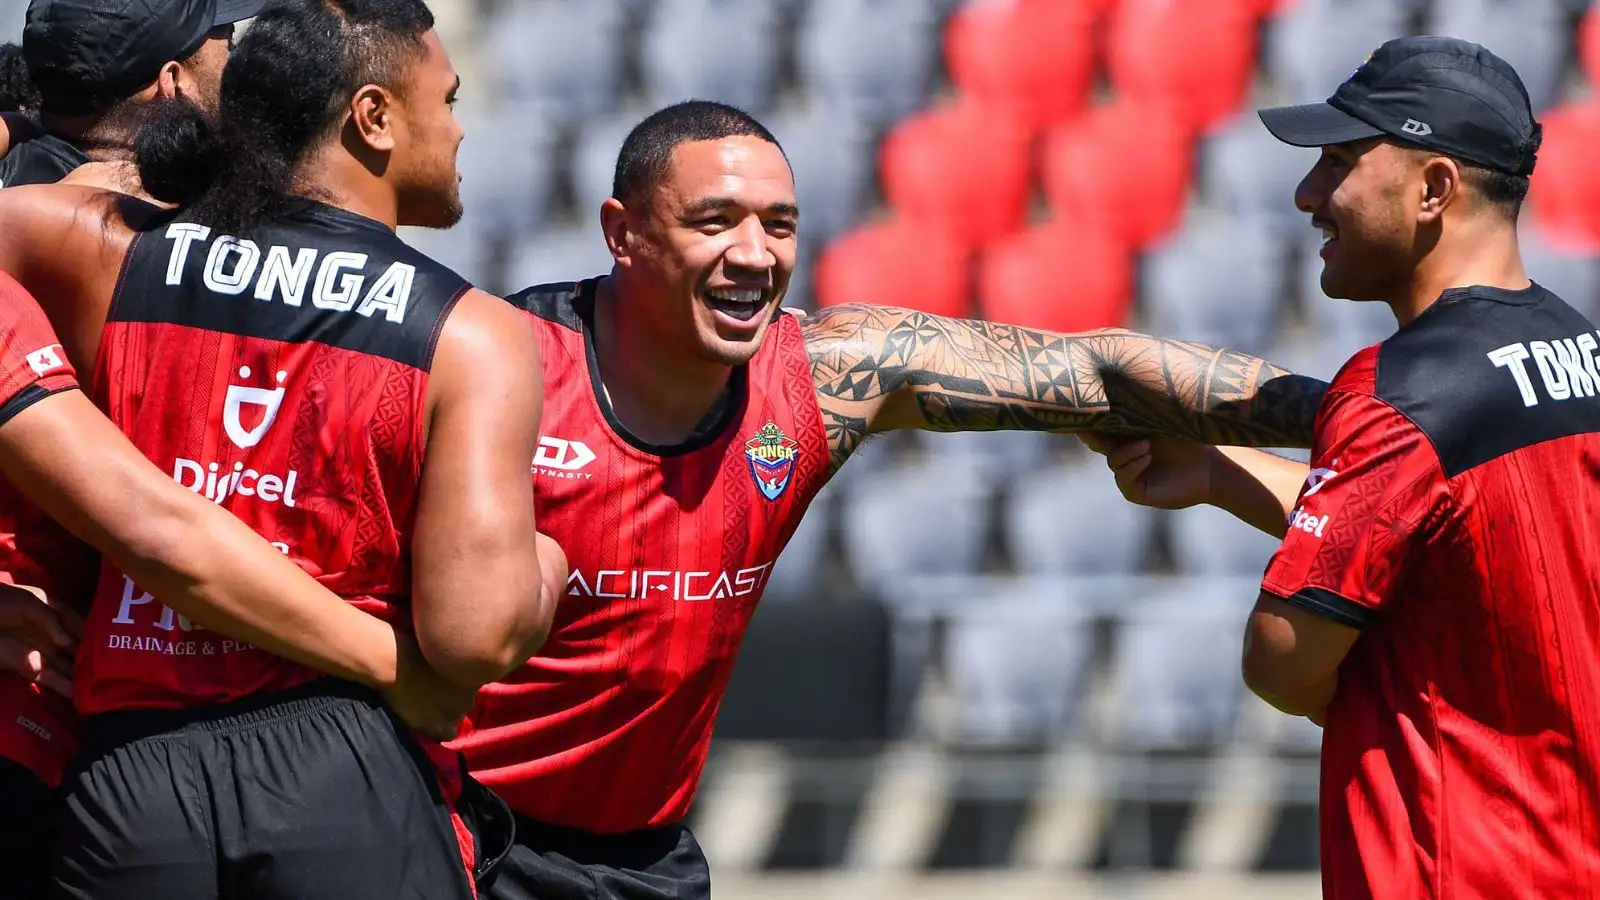 From Wales to Tonga via Australia: Tyson Frizell tells his incredible international rugby league story